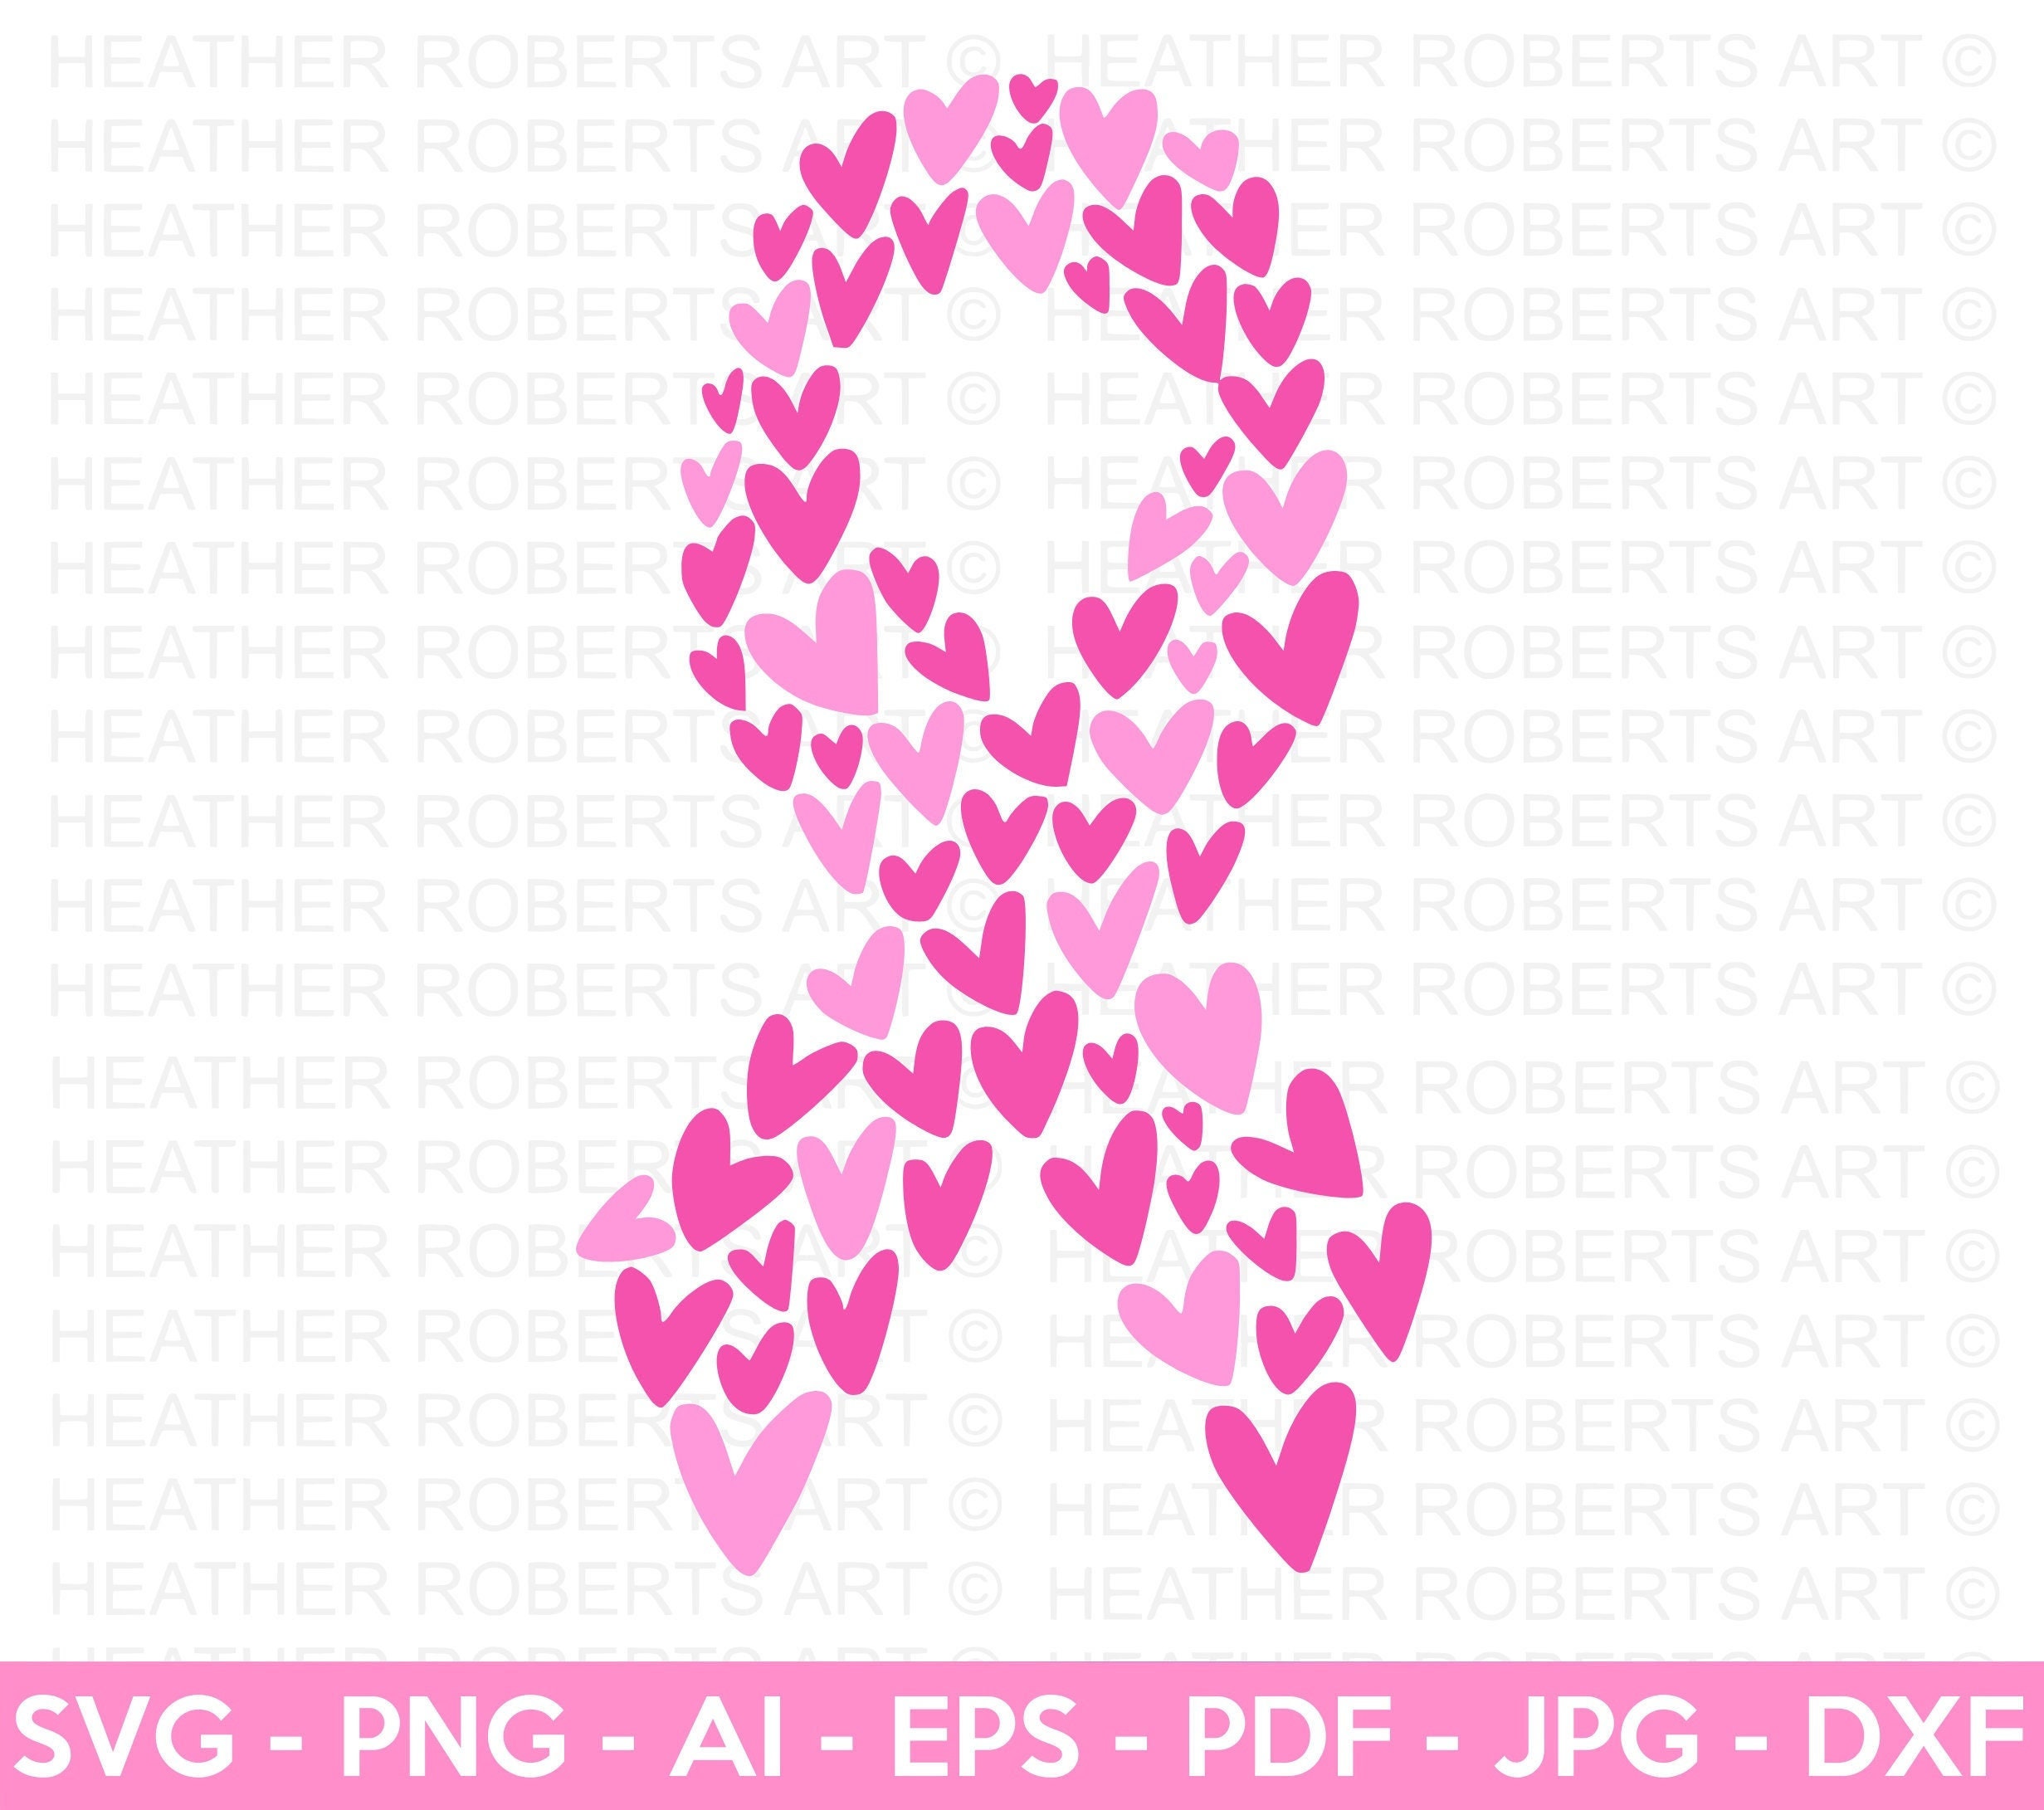 Woman face combined with pink ribbon clipart image, breast cancer awareness  - free svg file for members - SVG Heart